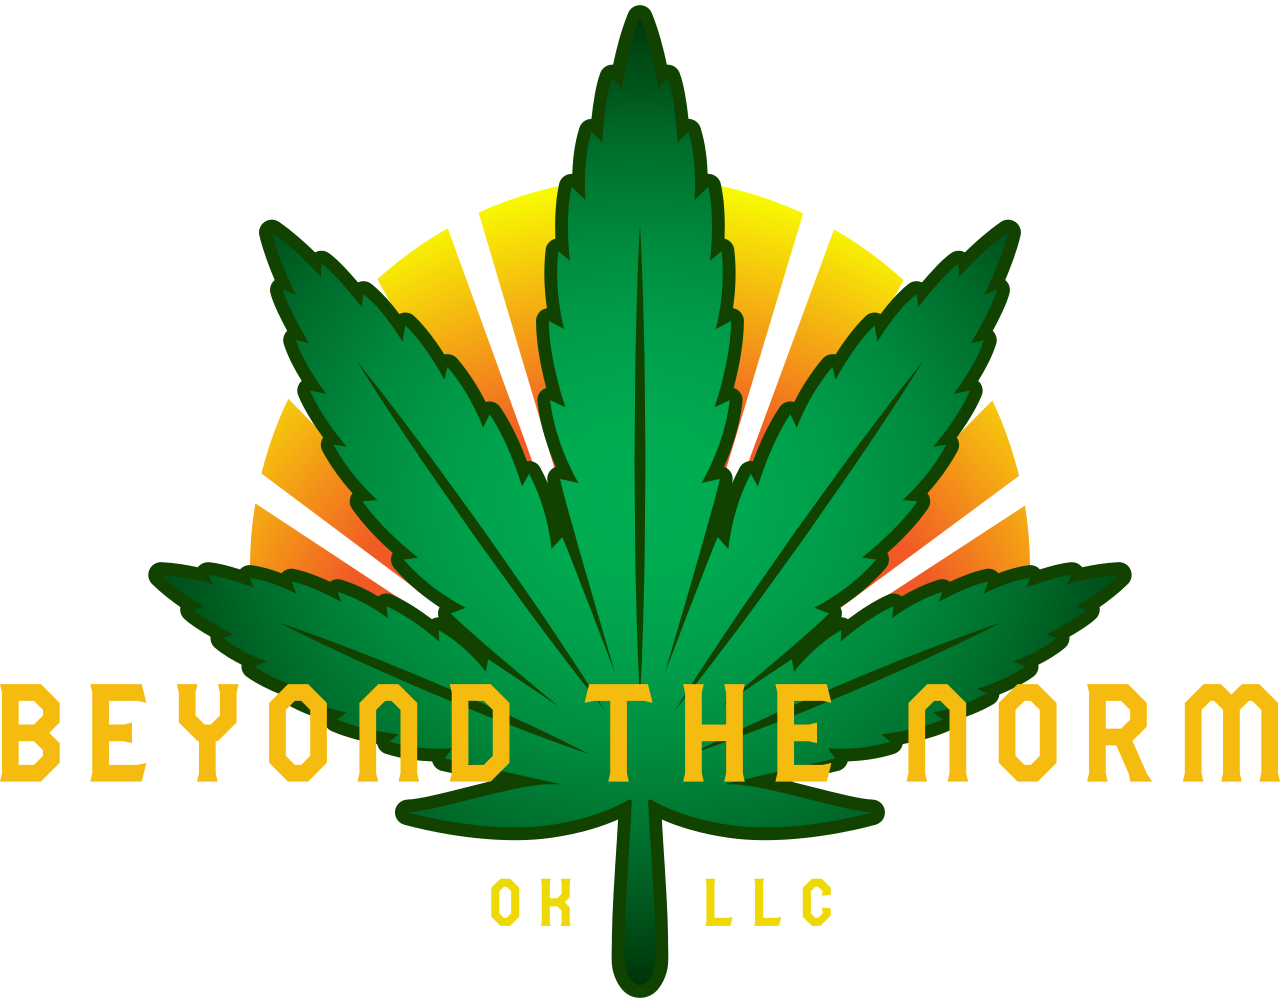 Beyond The Norm's logo